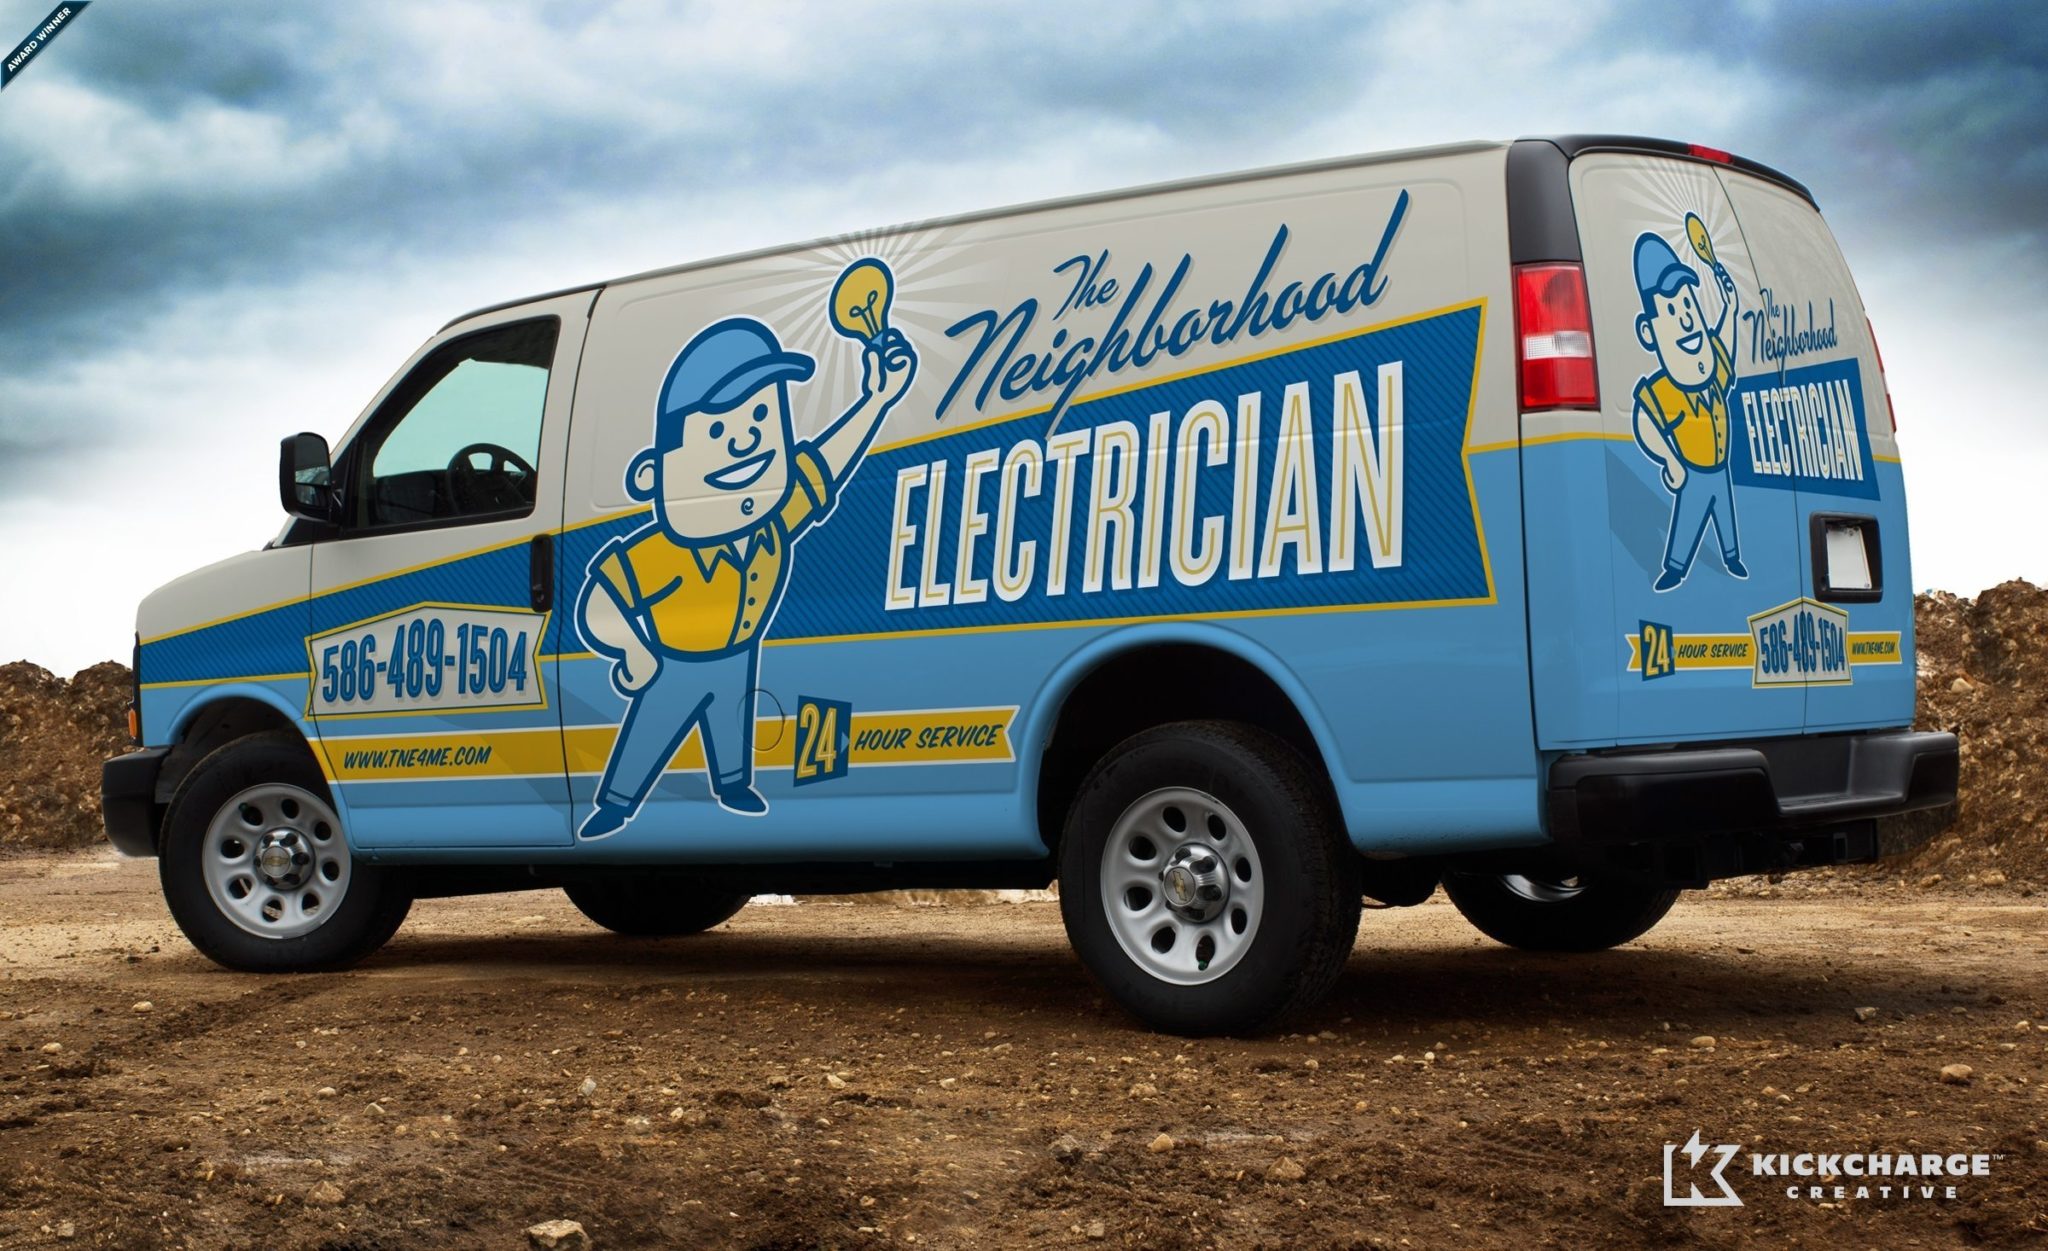 Award winning Retro themed branding and truck wrap design for an electrician in Michigan.